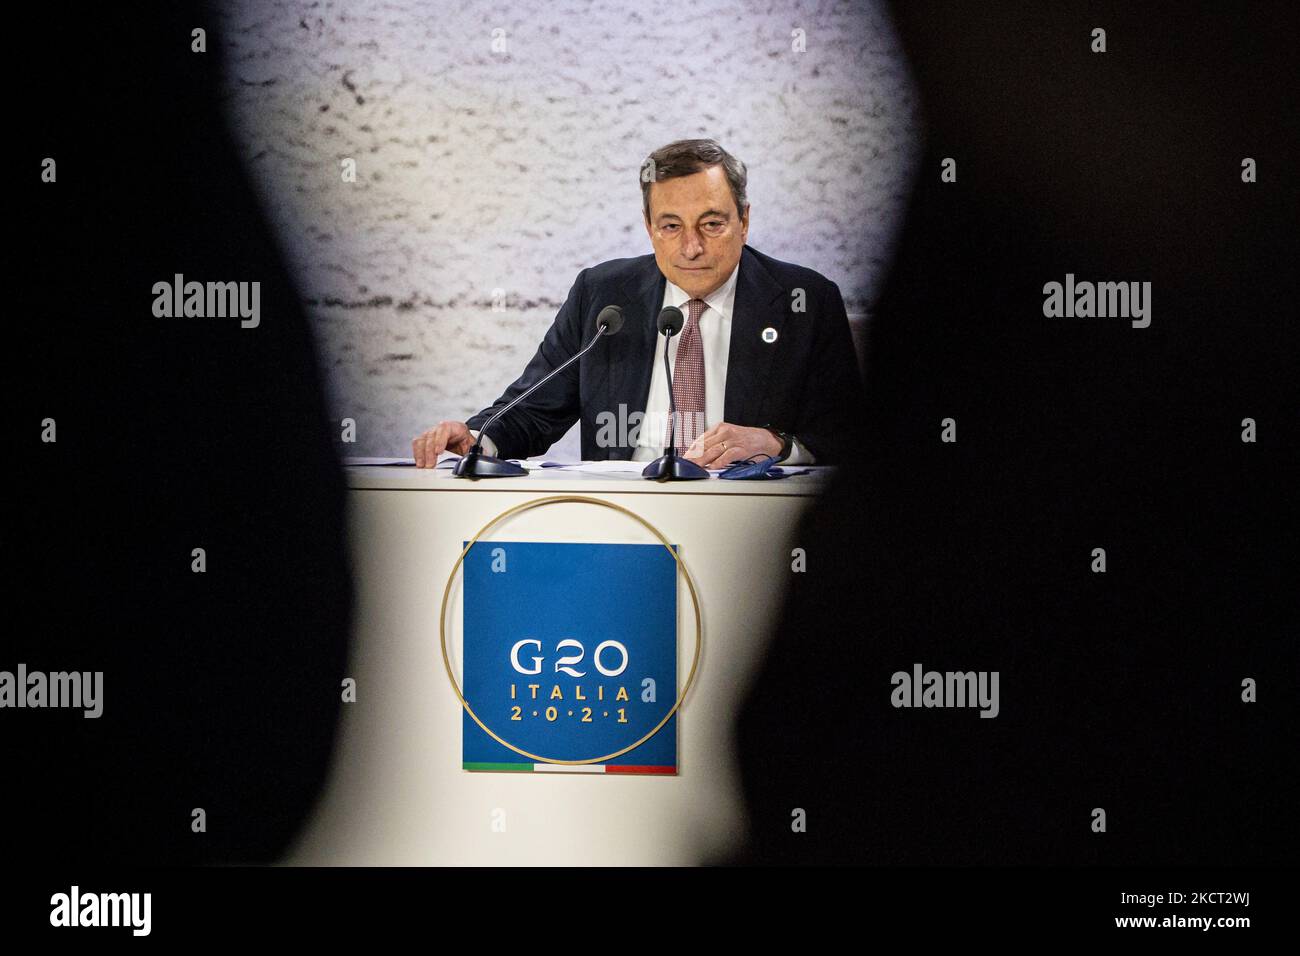 Mario Draghi, Prime Minister of Italy, gives a press conference after the G20 Summit in Rome, Italy. (Photo by Celestino Arce/NurPhoto) Stock Photo